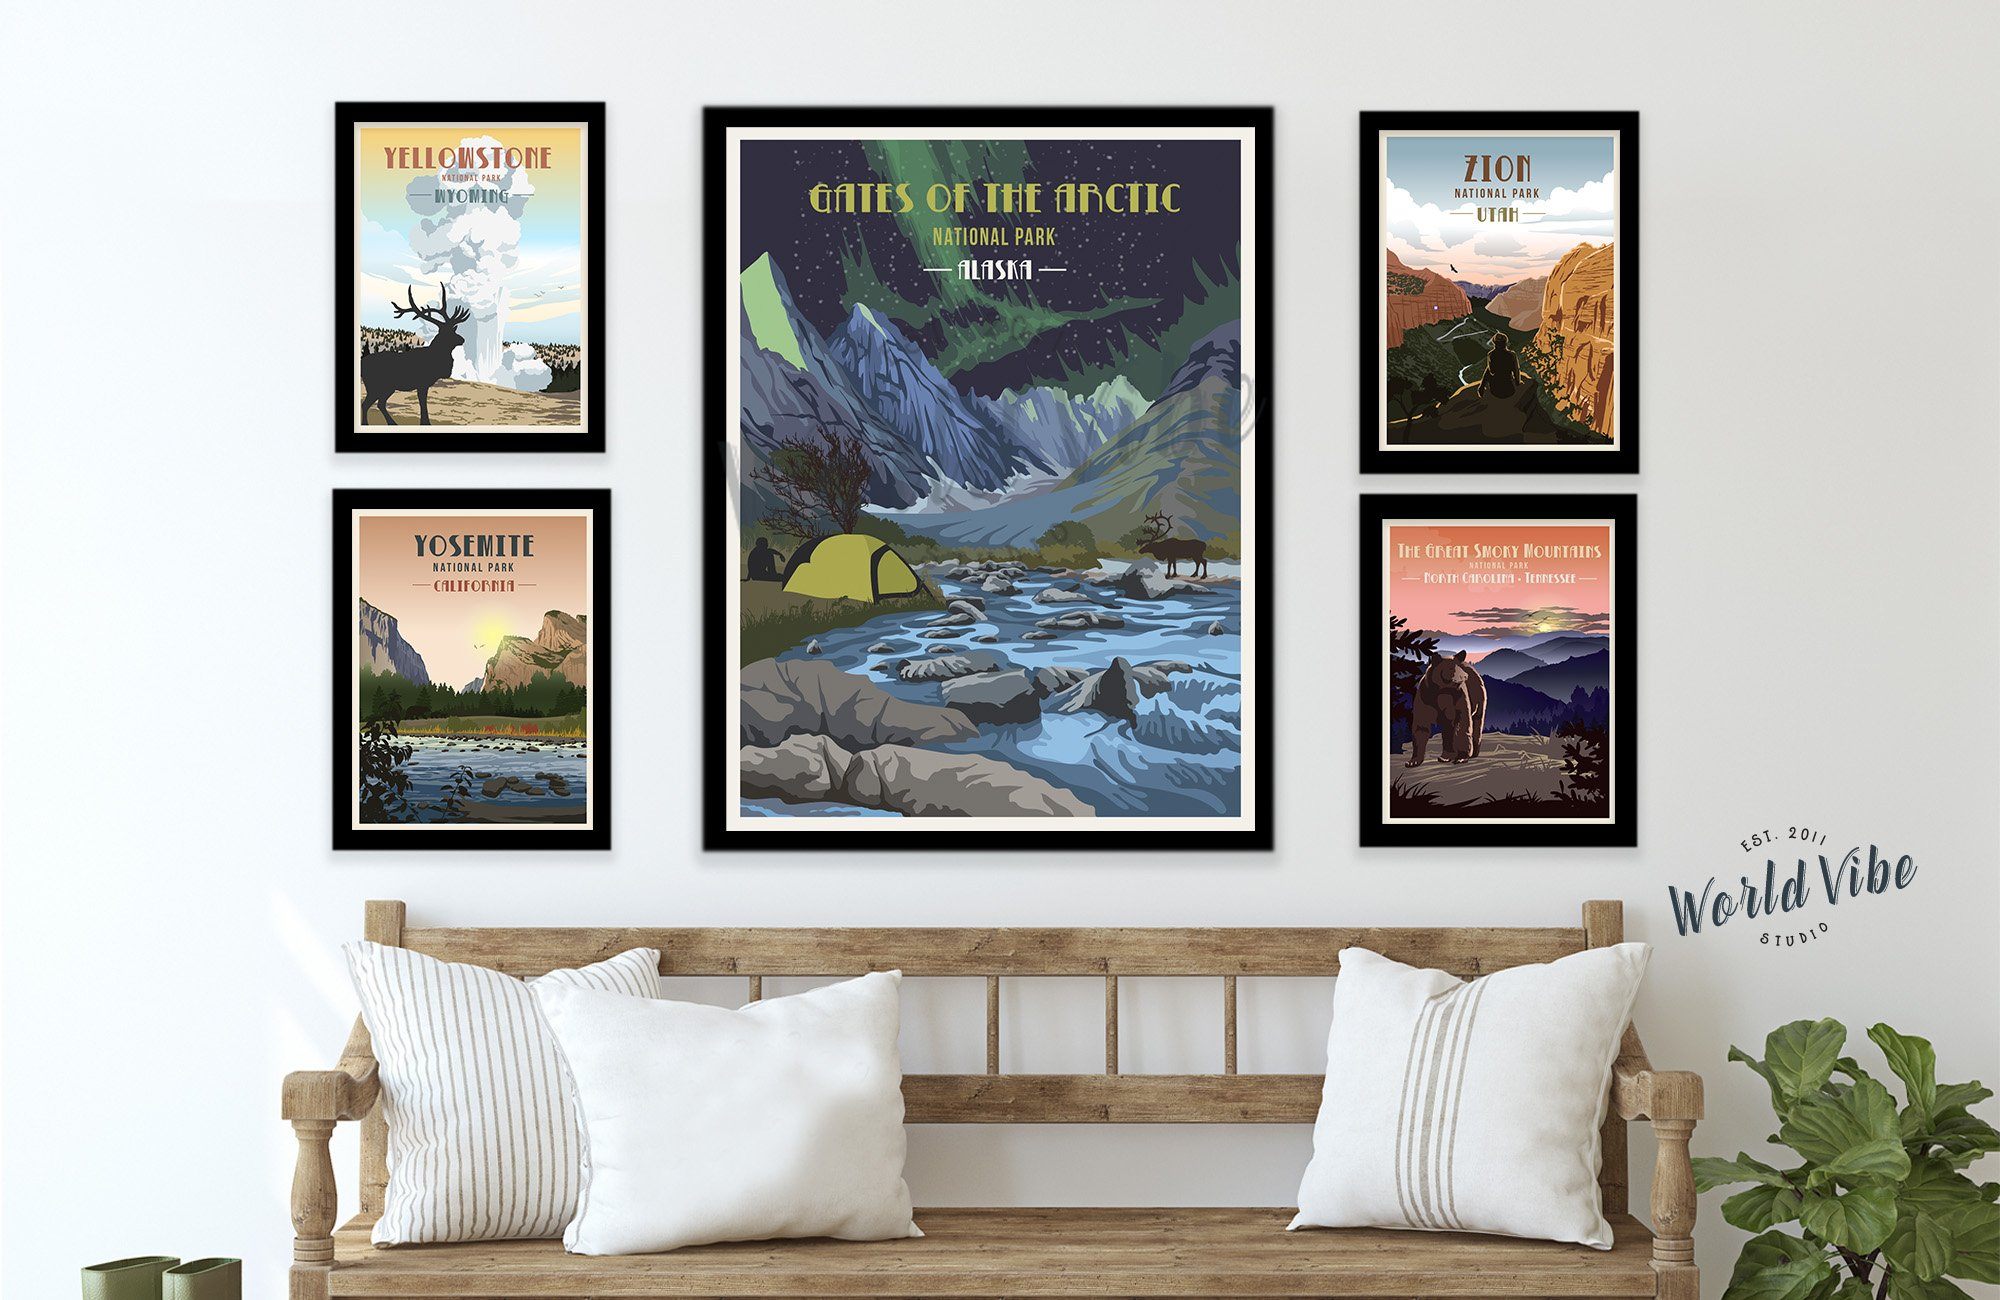 Gates of The Arctic National Park Poster, National Park Posters, Wall Art, Unframed Map World Vibe Studio 